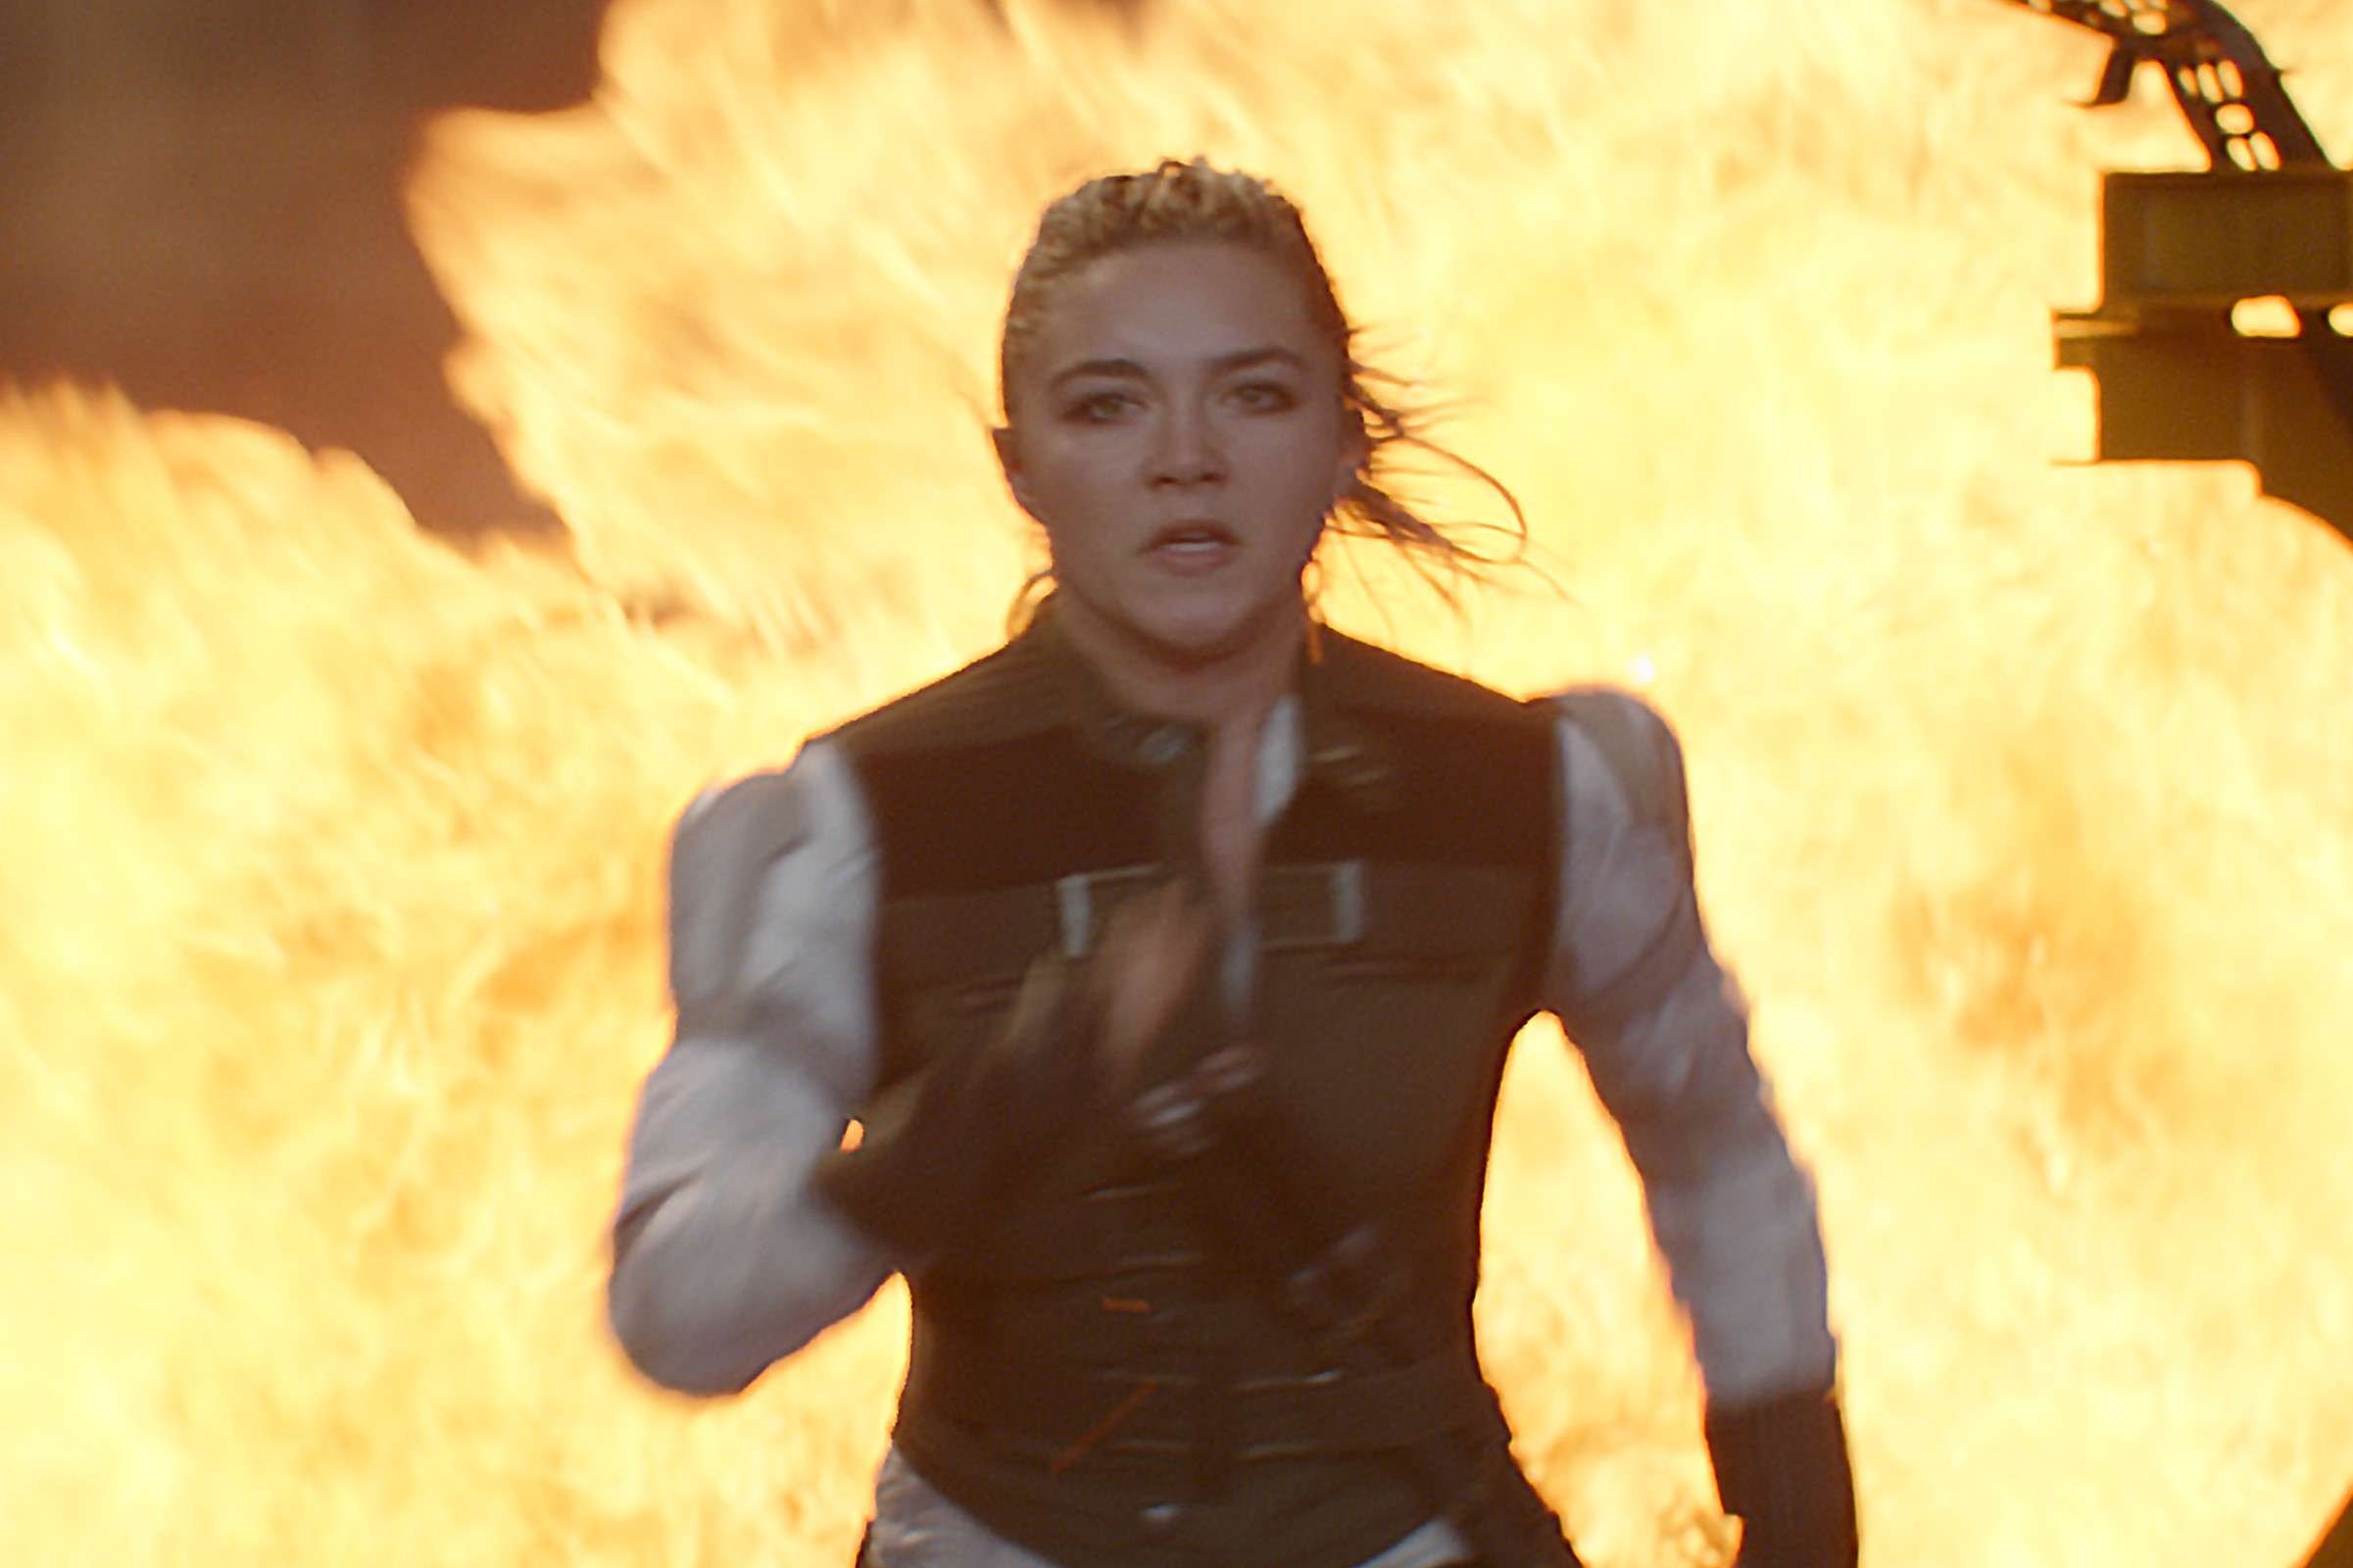 Florence Pugh is about to steal hearts as Yelena Belova in Black Widow, and...